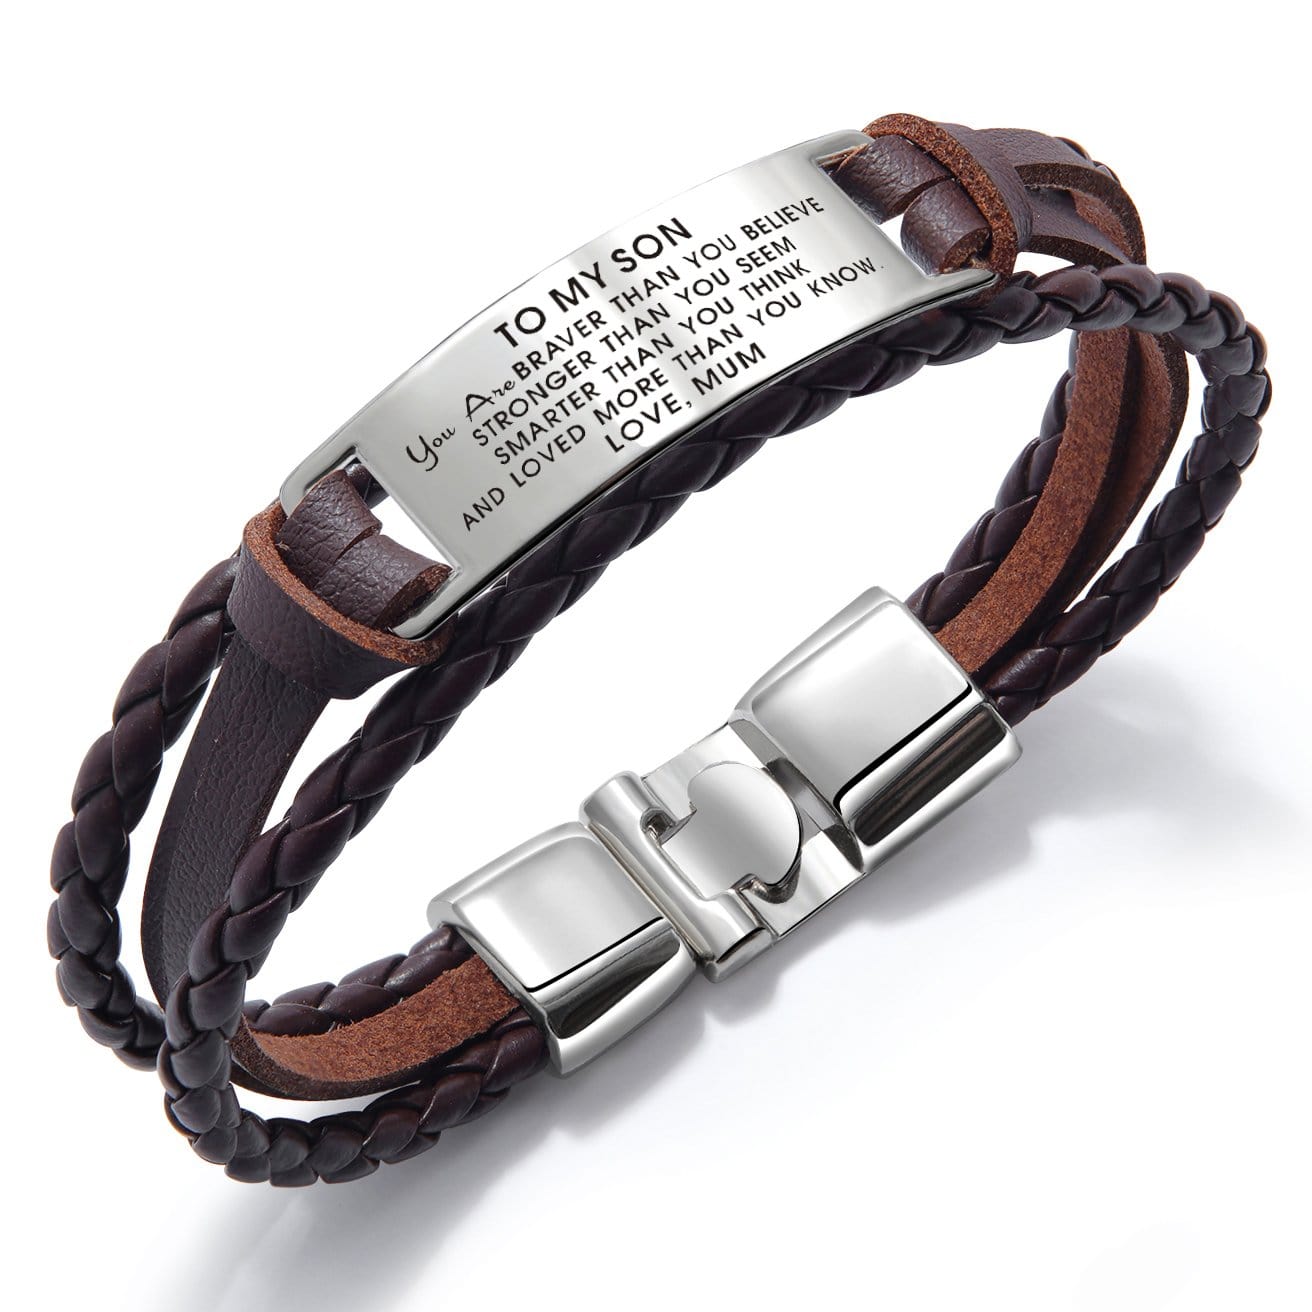 Bracelets Mum To Son - You Are Loved More Than You Know Leather Bracelet Brown GiveMe-Gifts